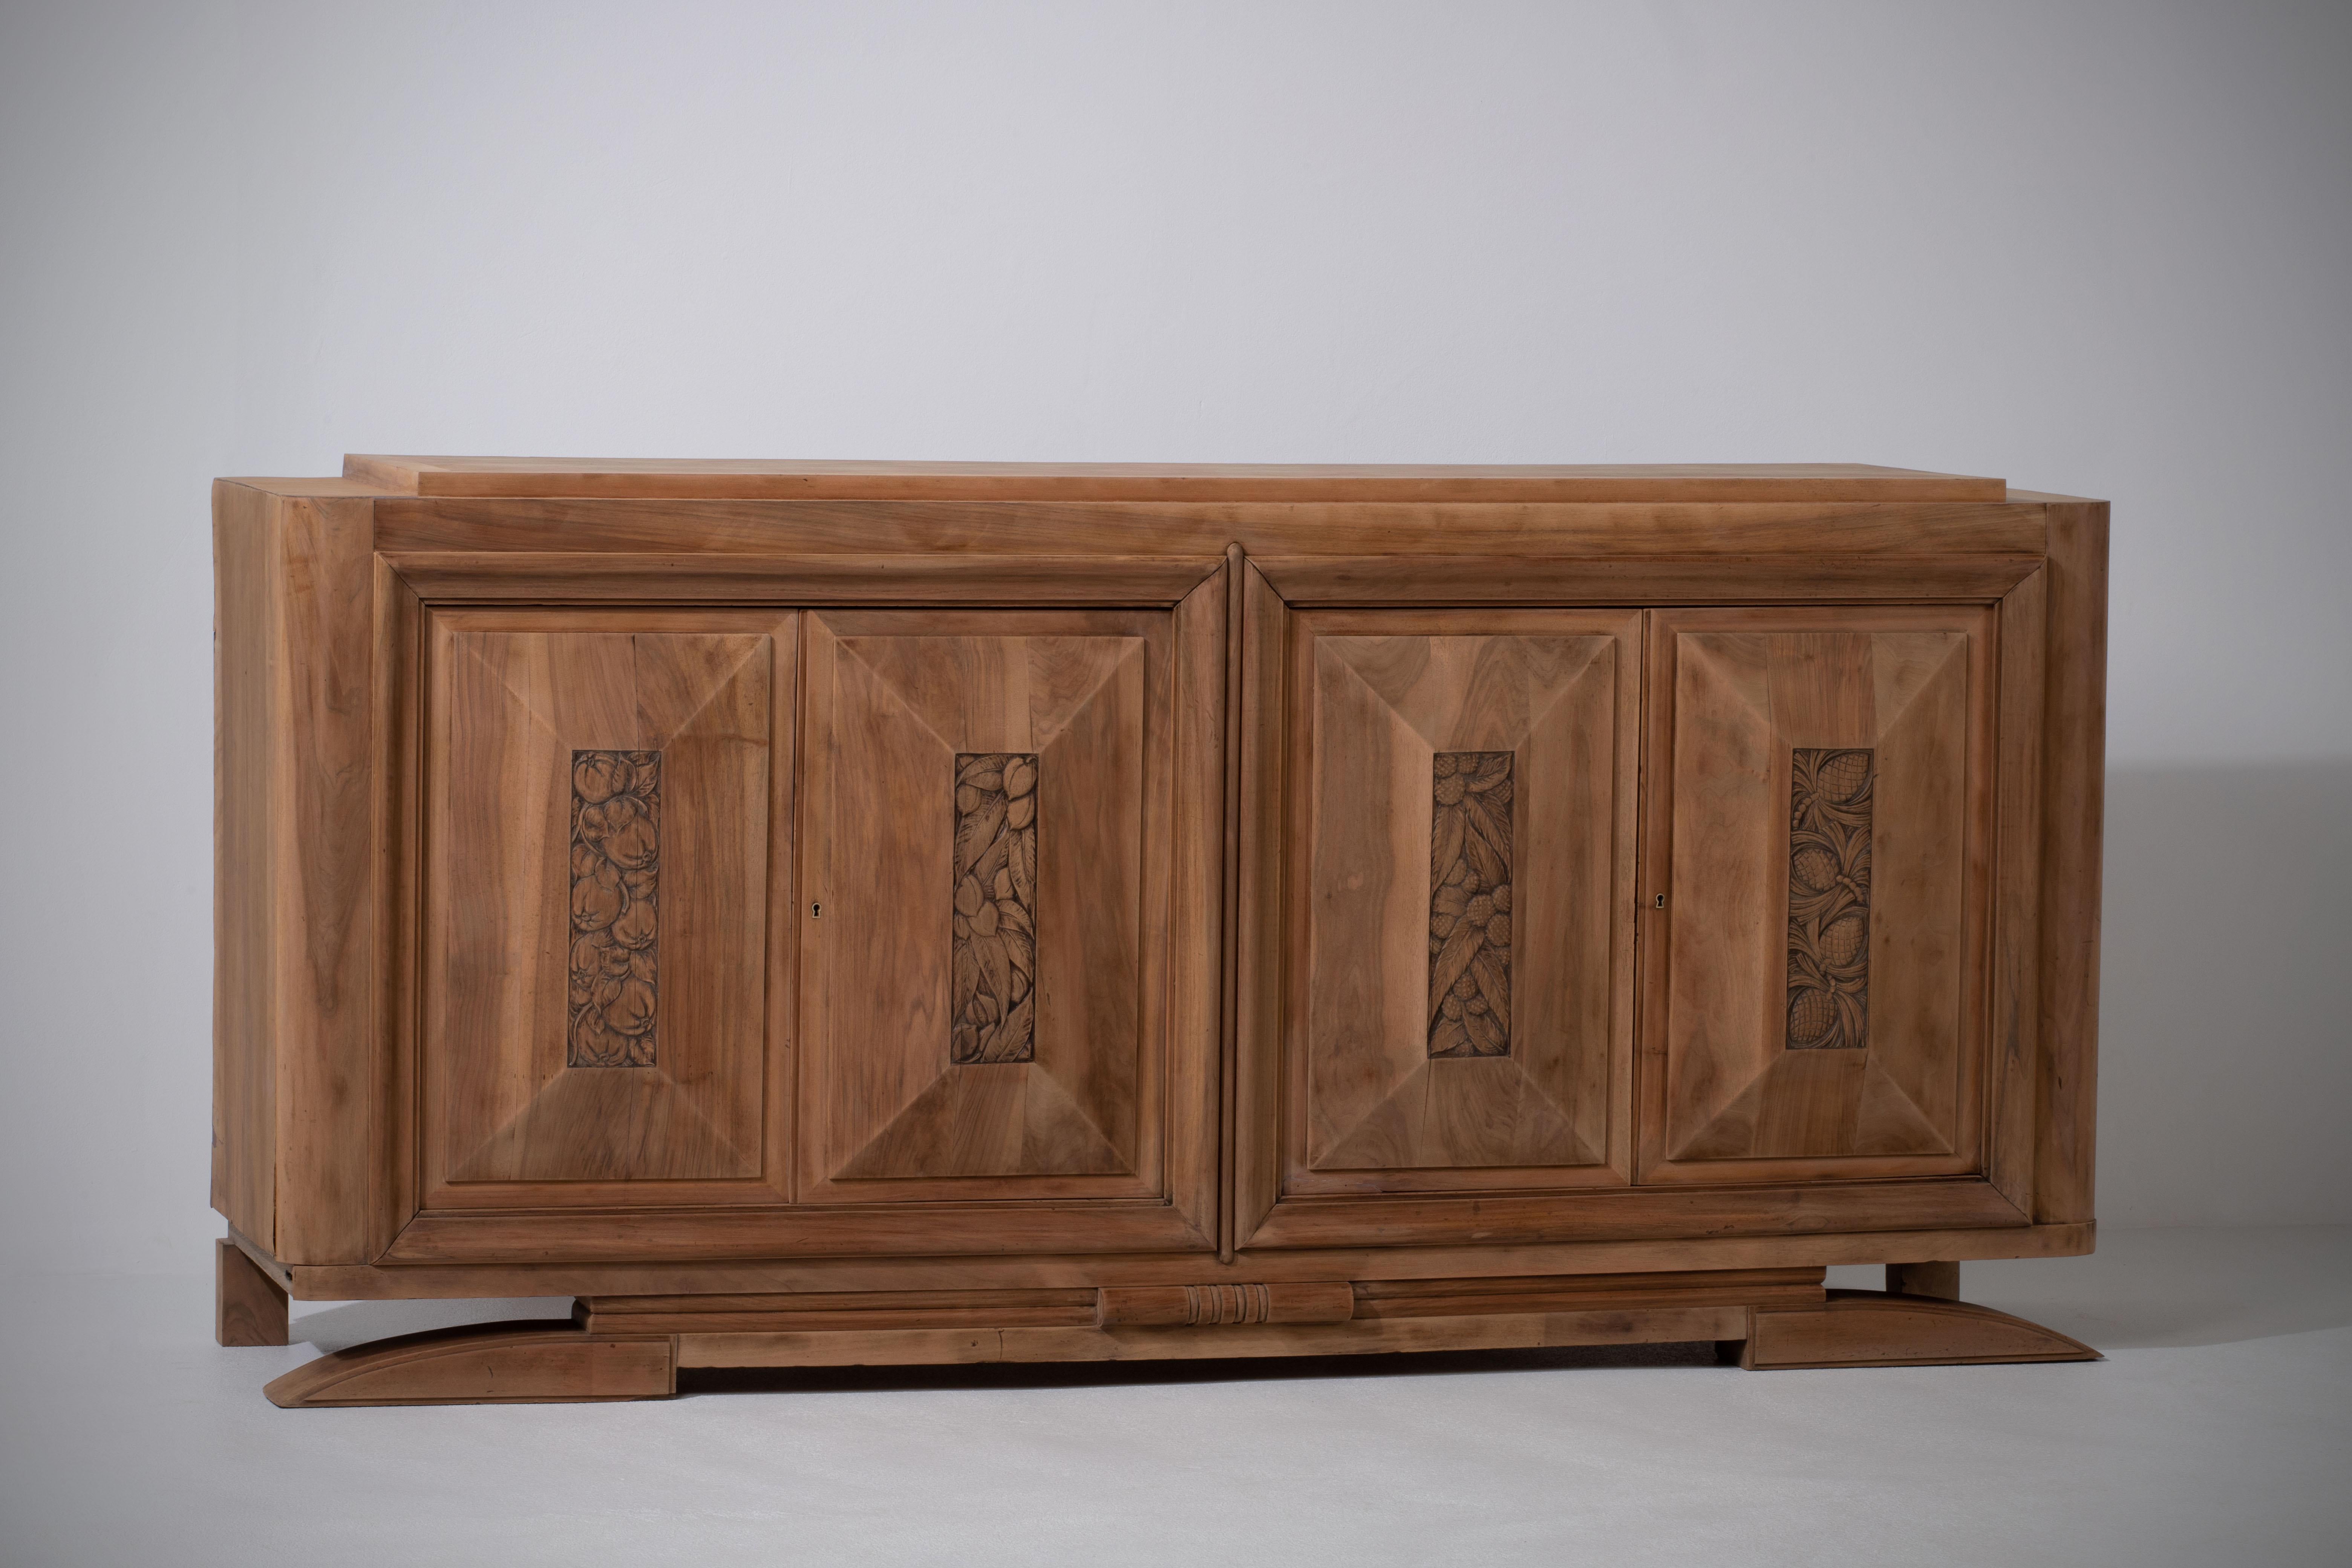 Introducing an exquisite mahogany buffet that exudes timeless elegance and sophistication. Crafted with meticulous attention to detail, this piece showcases the rich and luxurious beauty of mahogany wood.

The standout feature of this buffet is